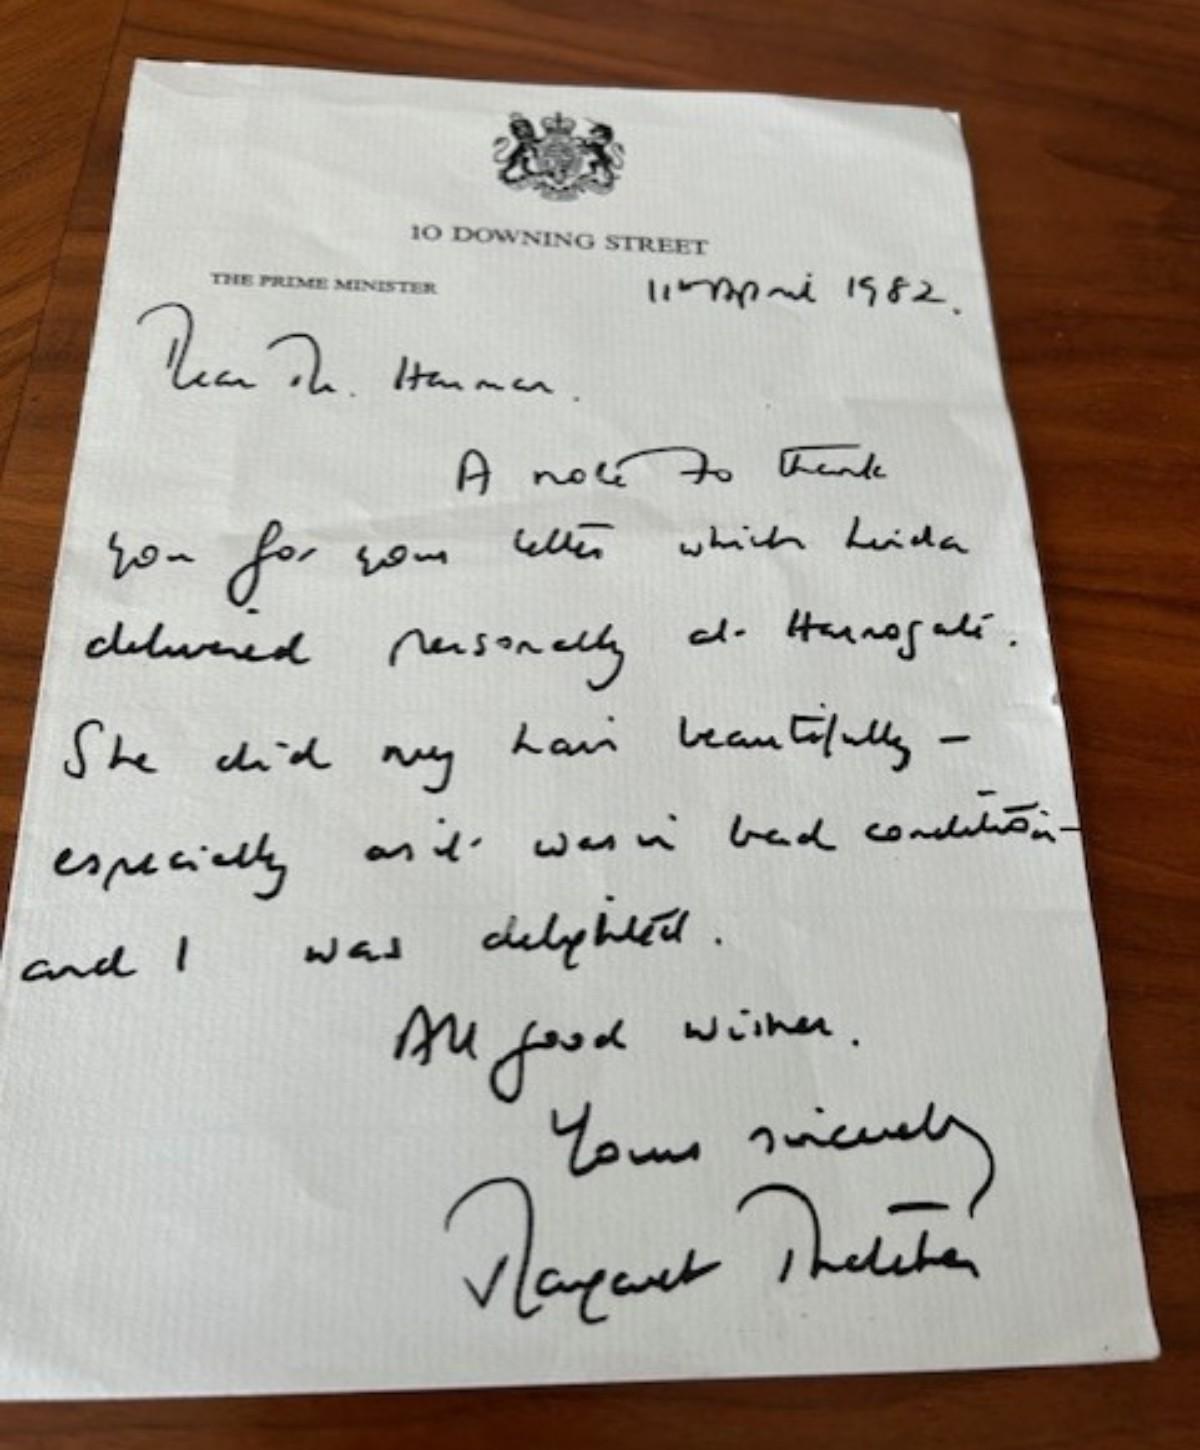 Photo of a letter sent to Peter Harman by Margaret Thatcher to thank him for Peter Gotthard's services when she was in Harrogate.